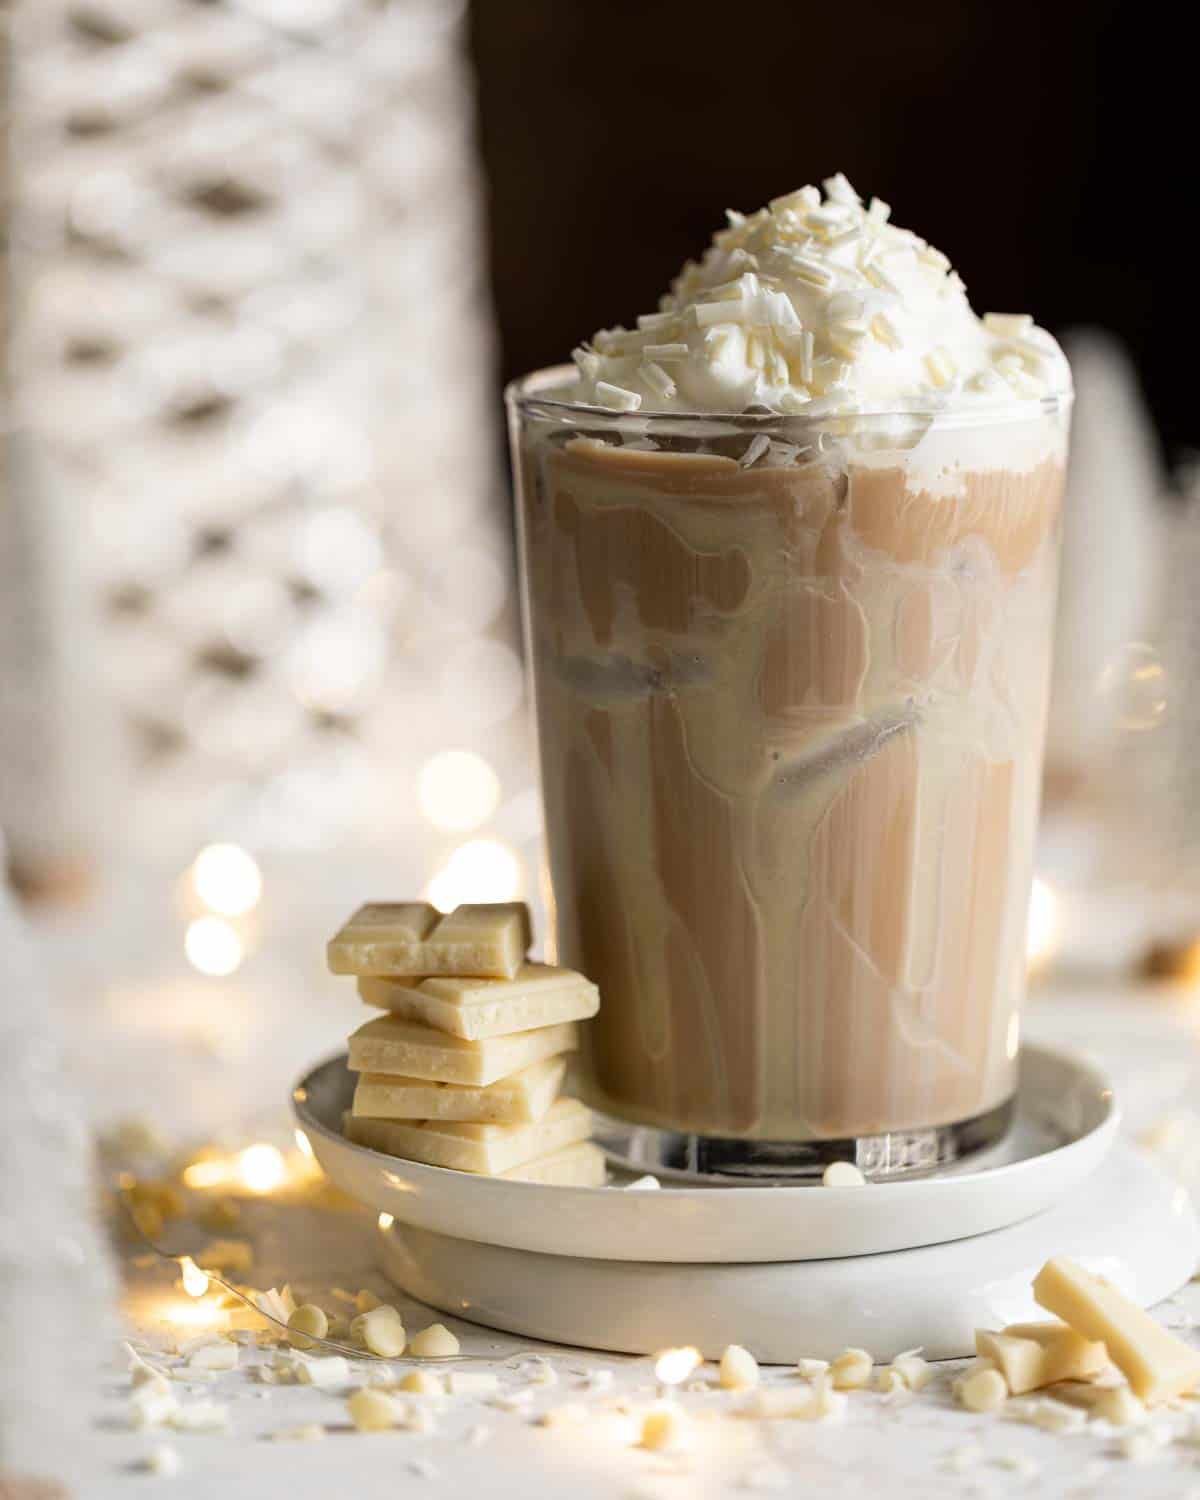 Iced white chocolate mocha recipe in a cup with whipped cream.